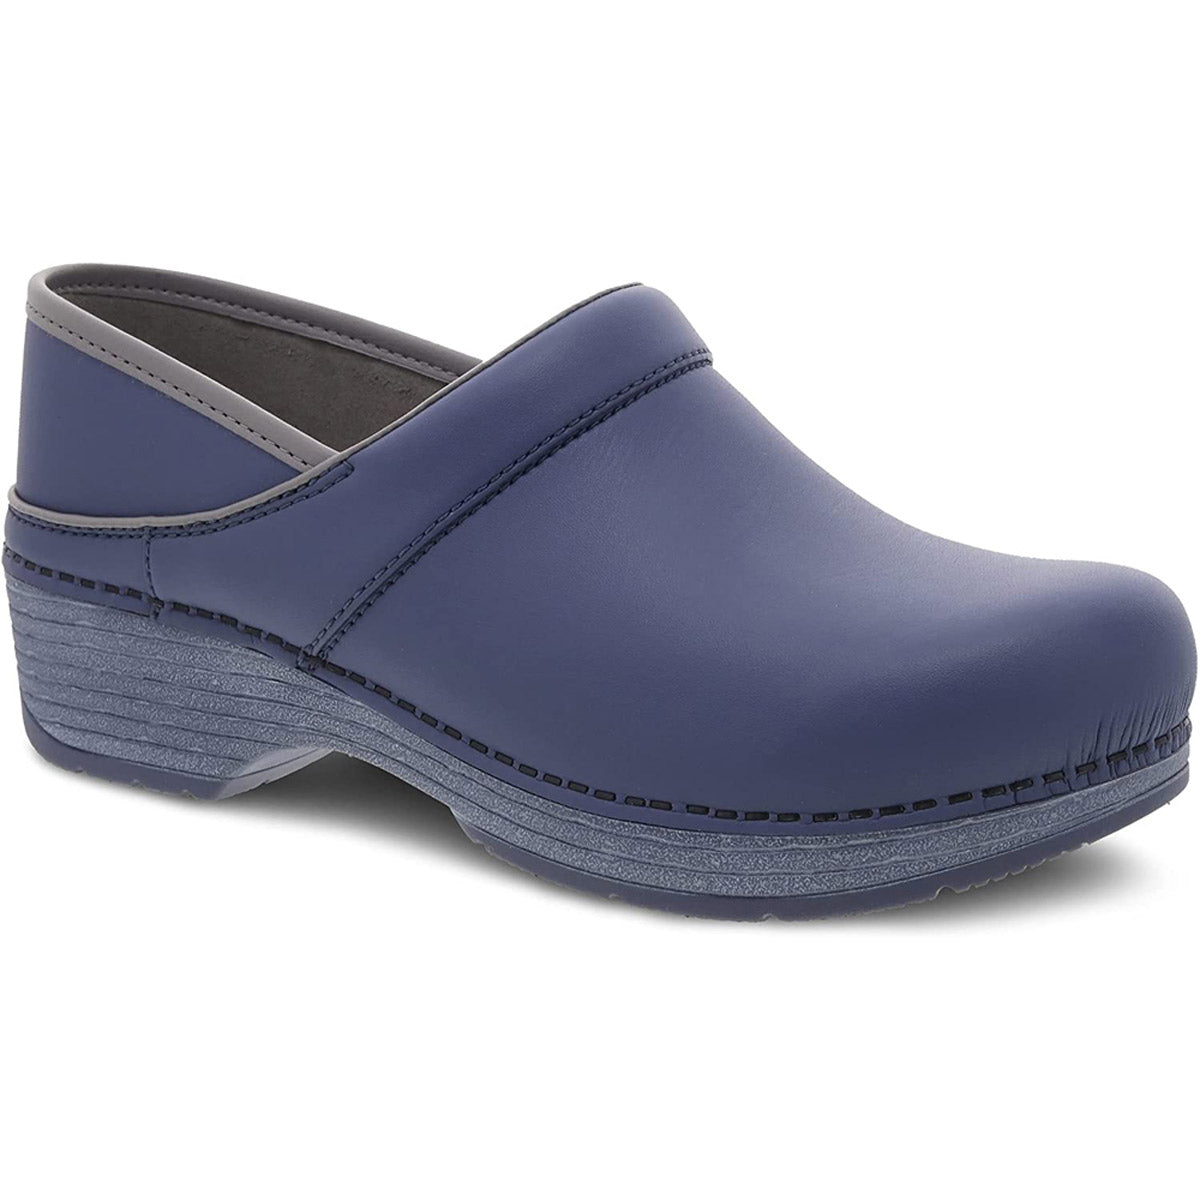 A single Dansko LT Pro Indigo Smooth - Womens clog shoe, featuring a cushioned footbed, with a low heel and no back.